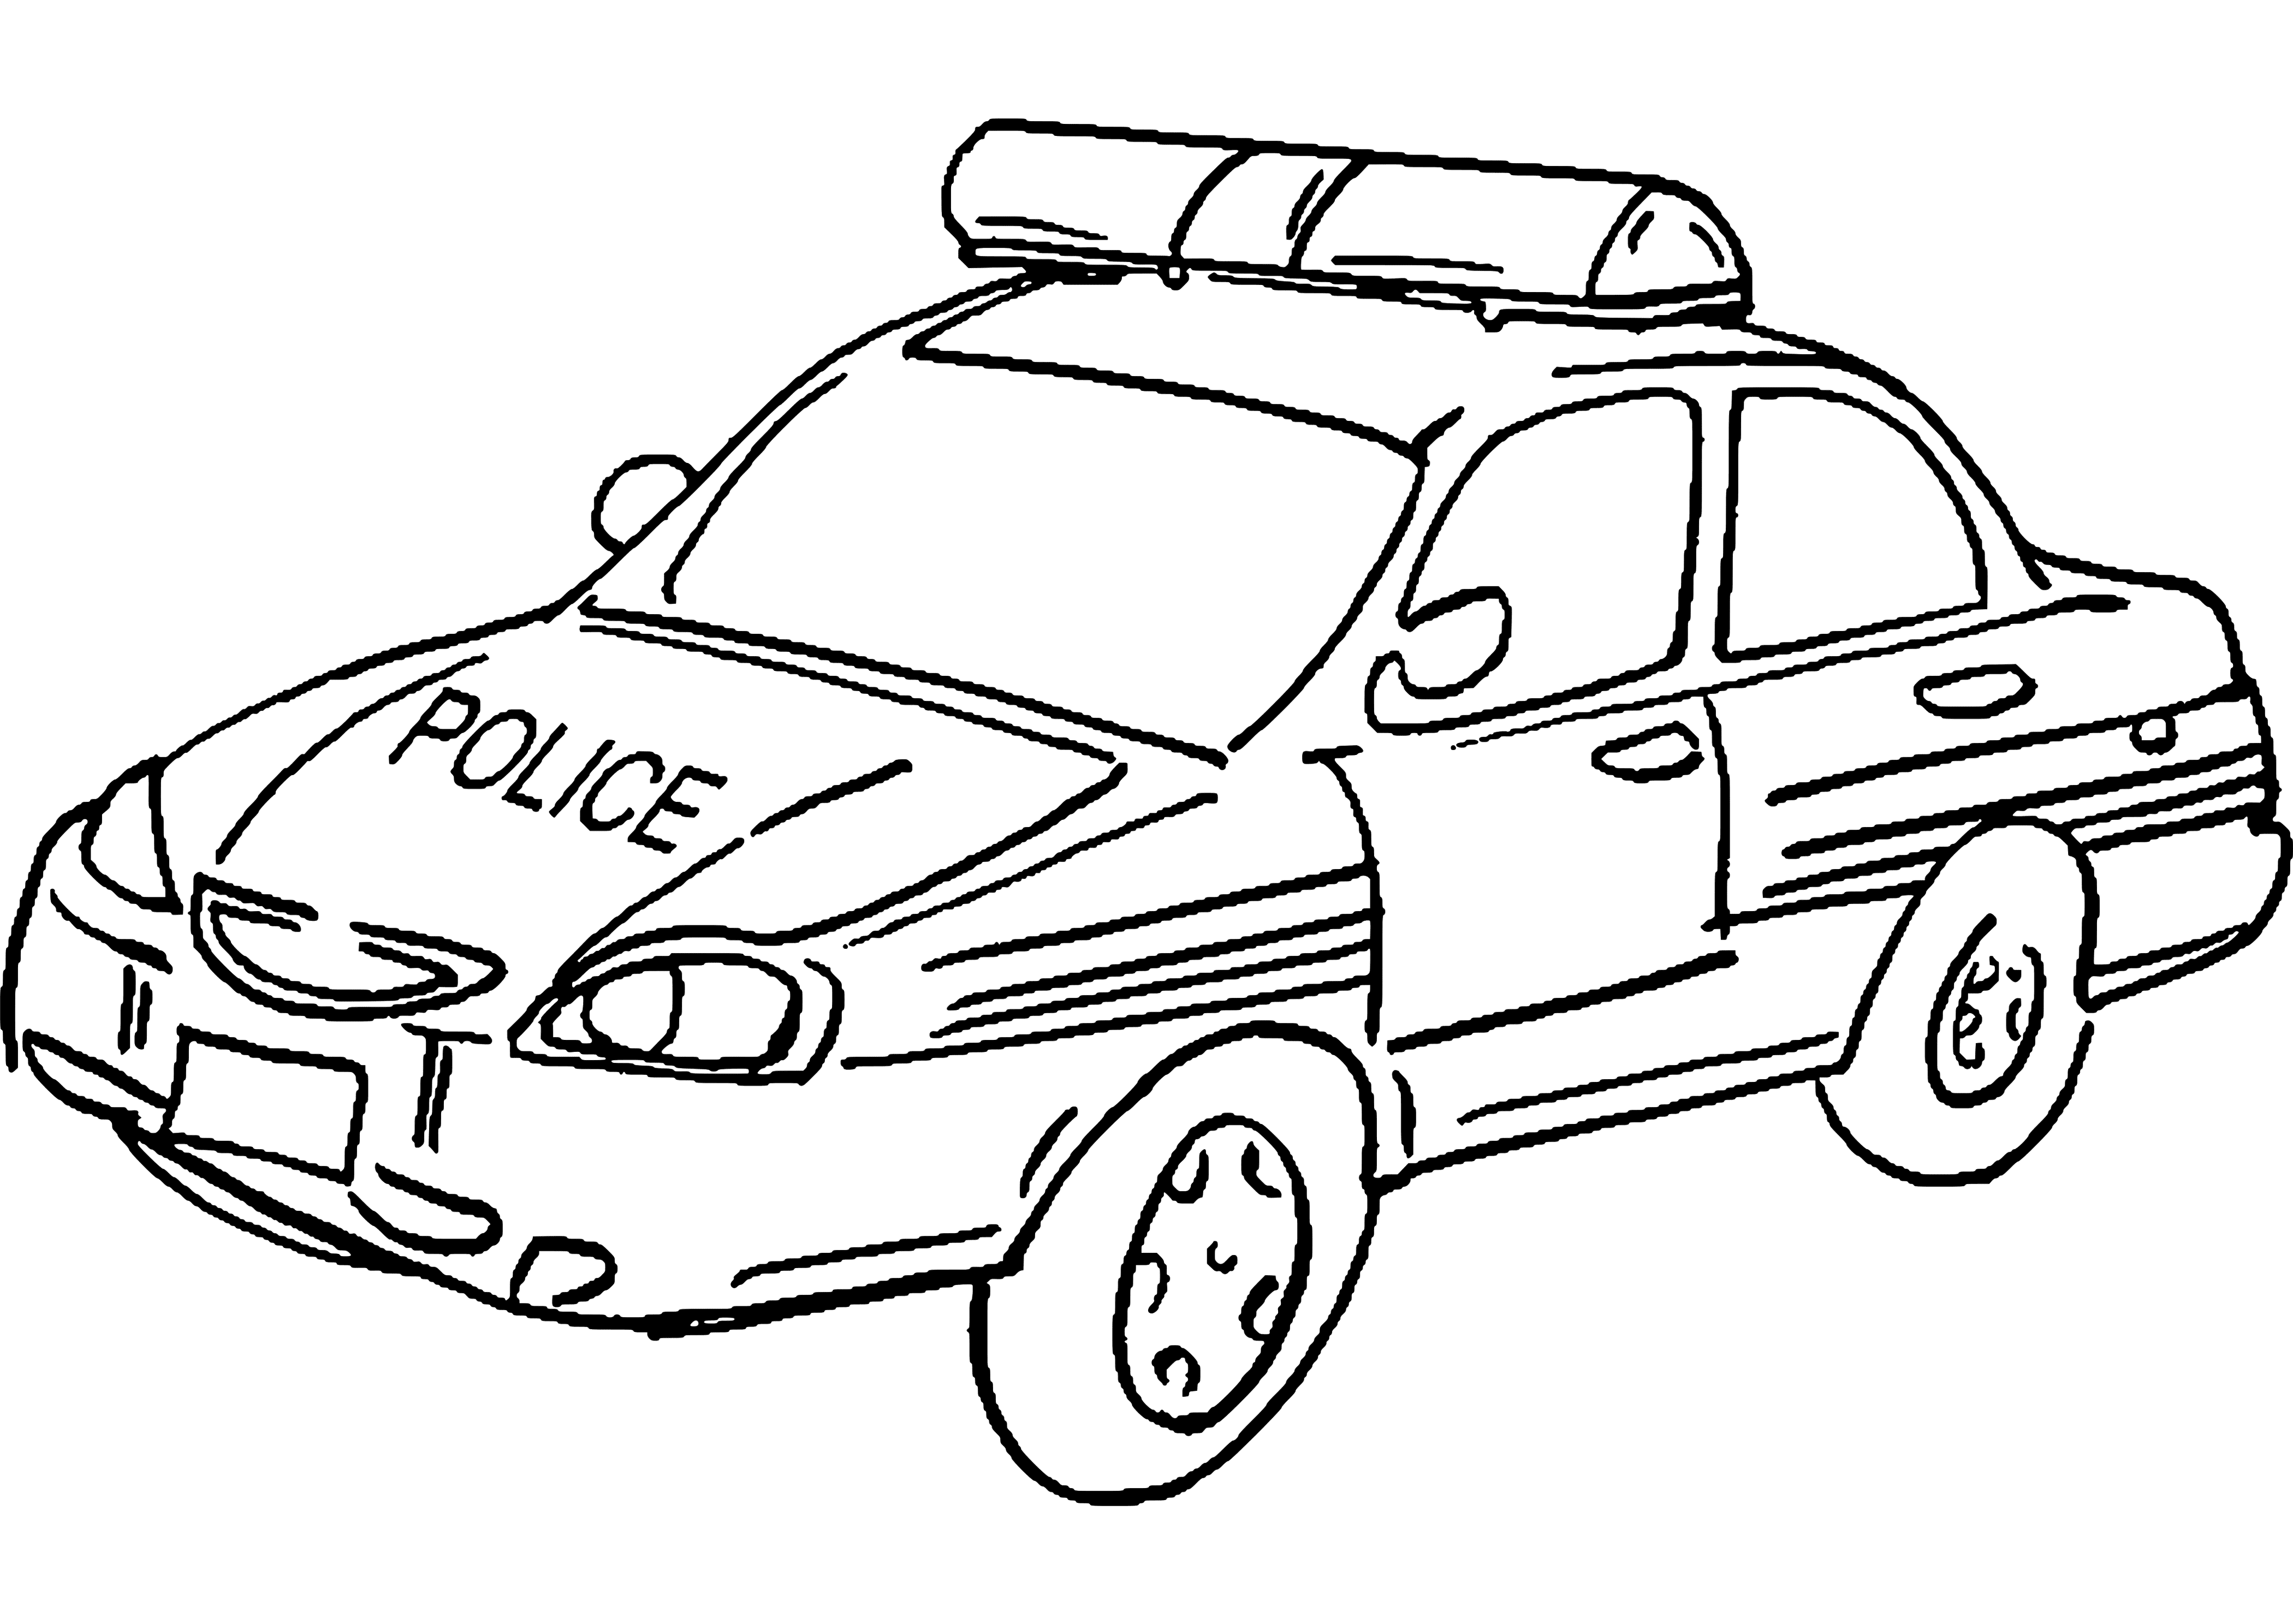 Drawing Police Car Coloring Pages - Coloring Cool